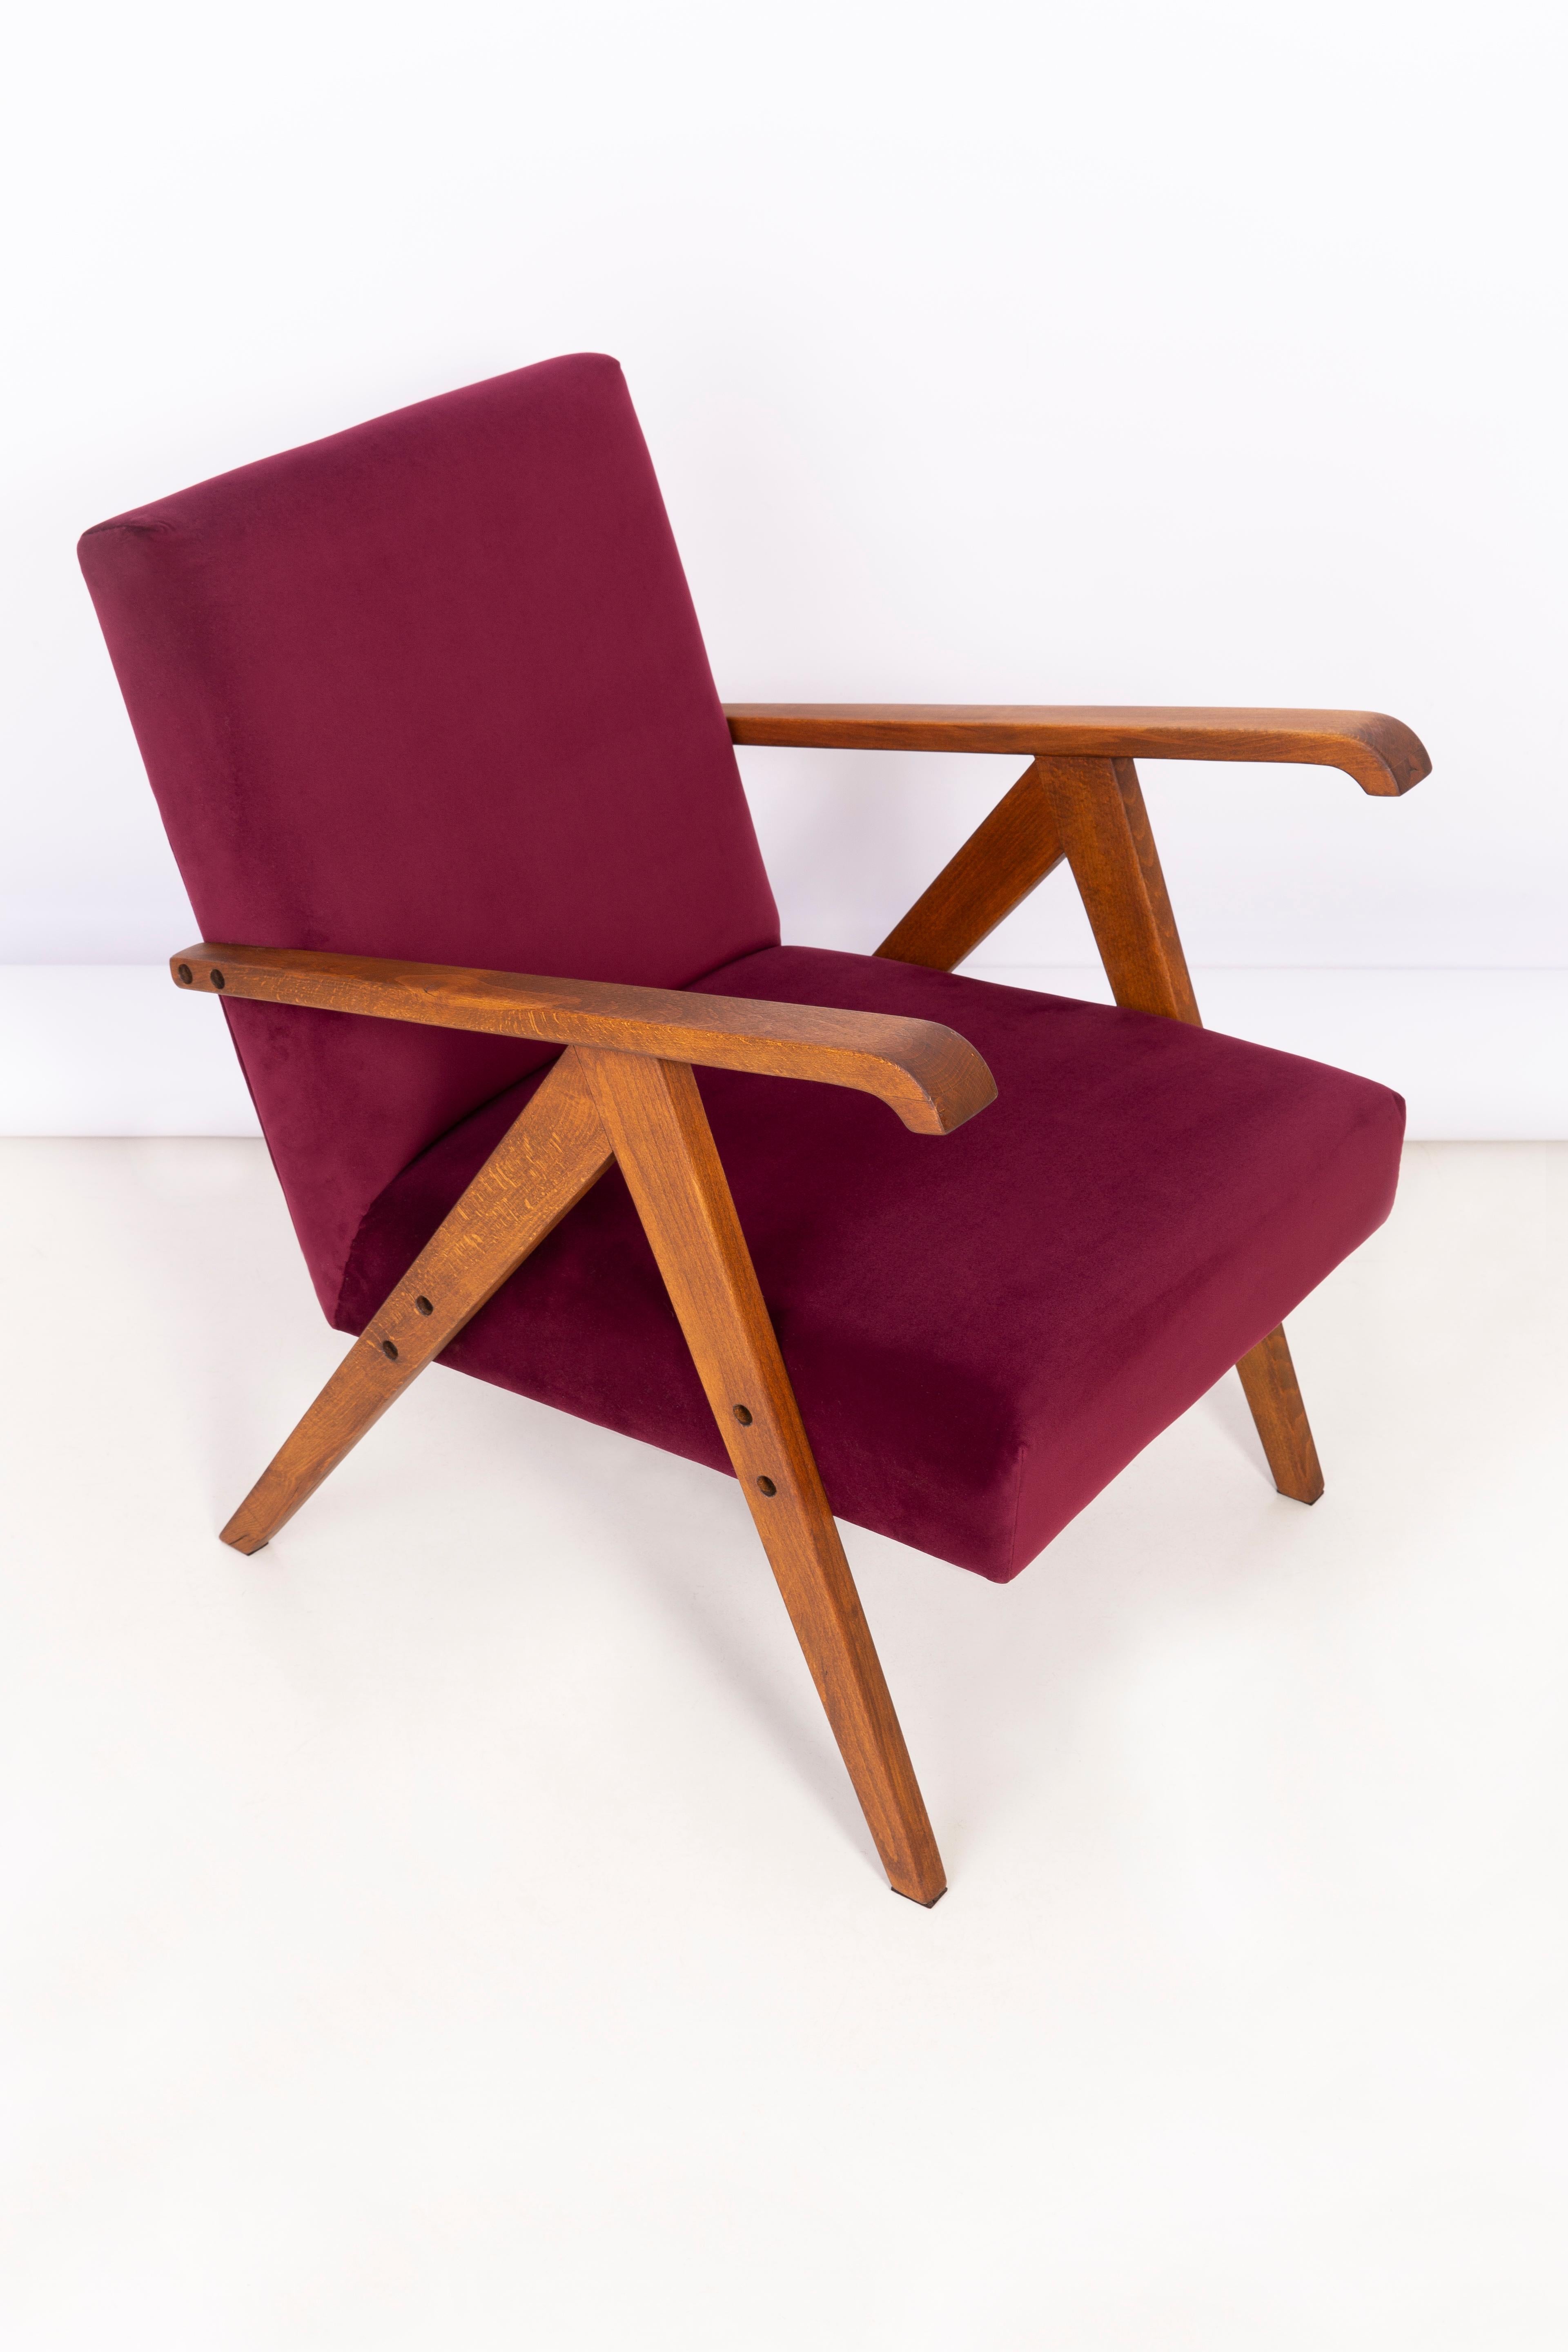 A beautiful, restored armchair designed by Henryk Lis. Furniture after full carpentry and upholstery renovation. The fabric, which is covered with a backrest and a seat, is a high-quality burgundy velvet upholstery (color 2932). The armchair will be